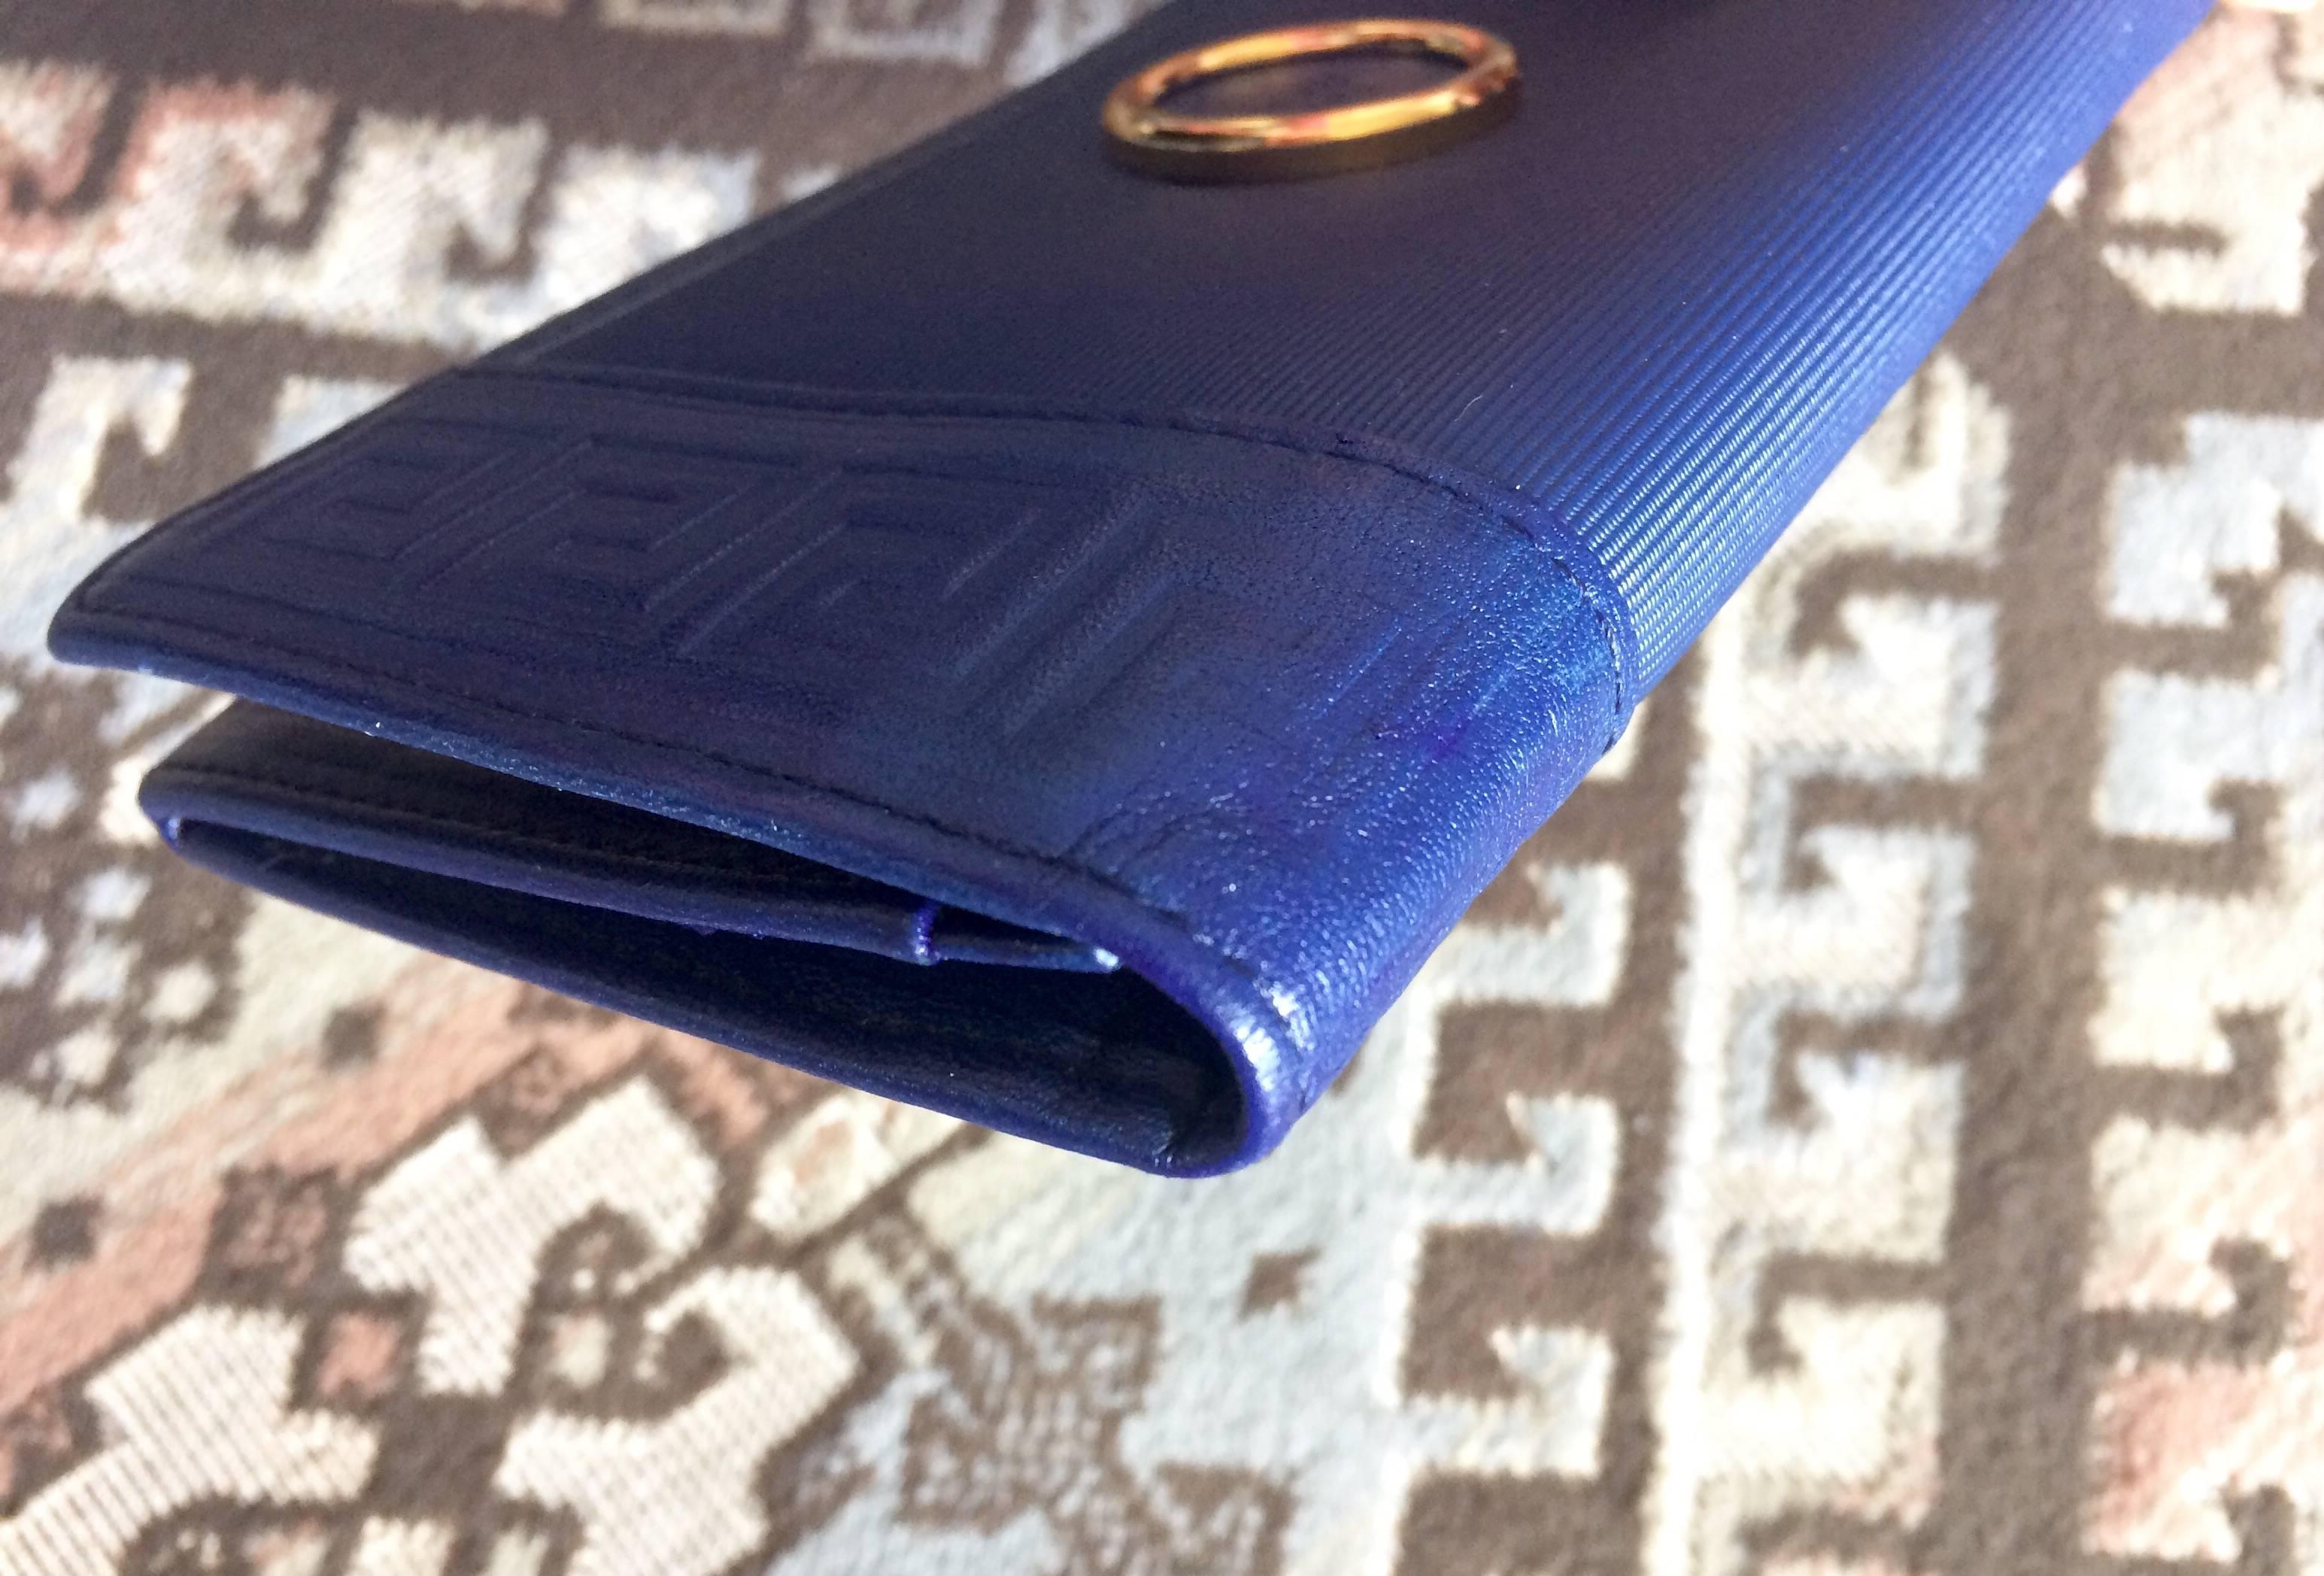 Blue Vintage Gianni Versace blue wallet with geometric pattern and logo round motif.